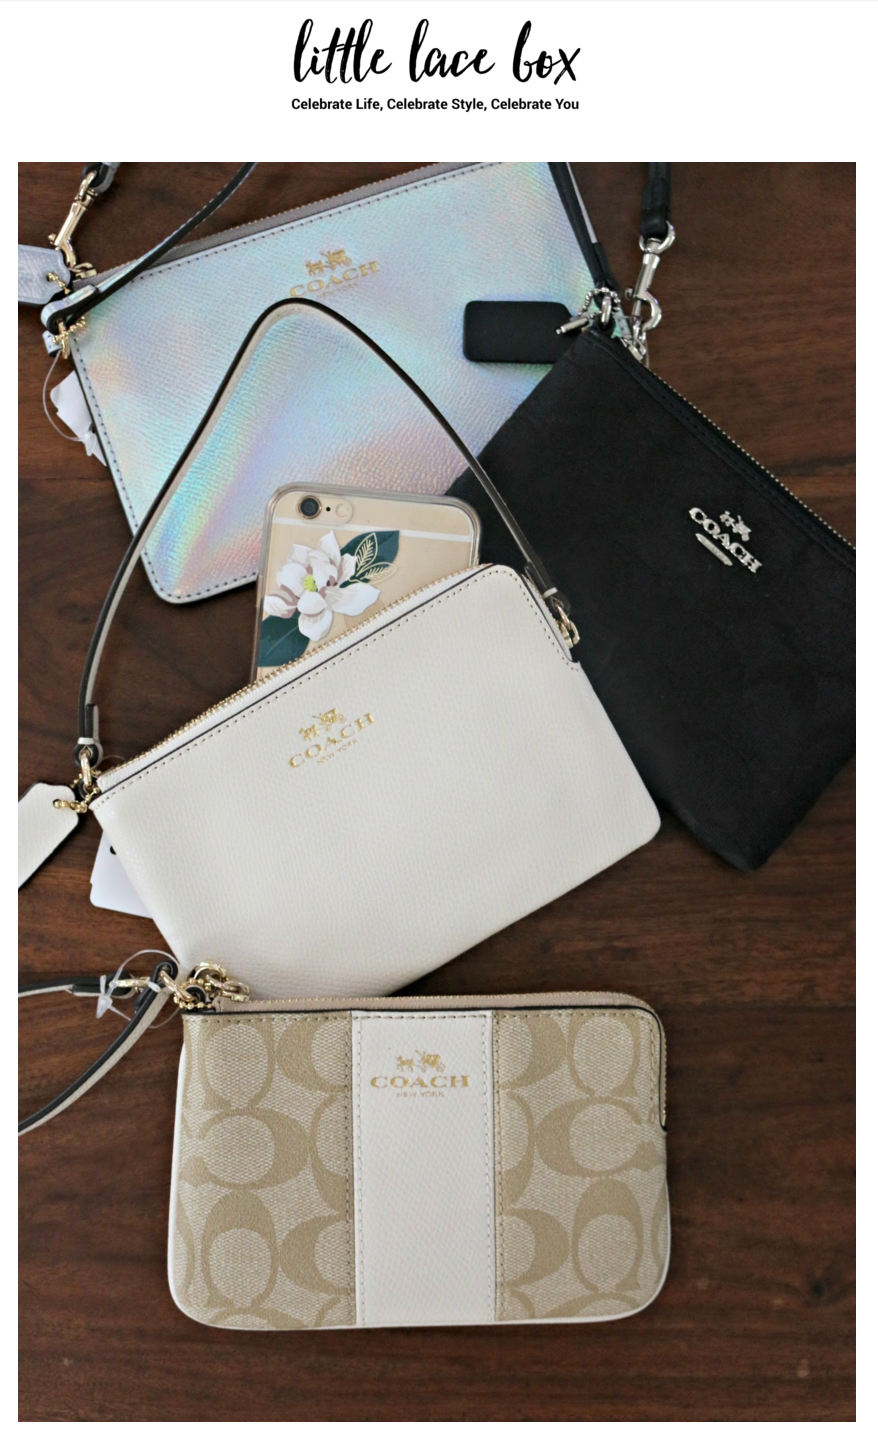 Free Coach Wristlet + $20 Off with Little Lace Box Annual Subscription